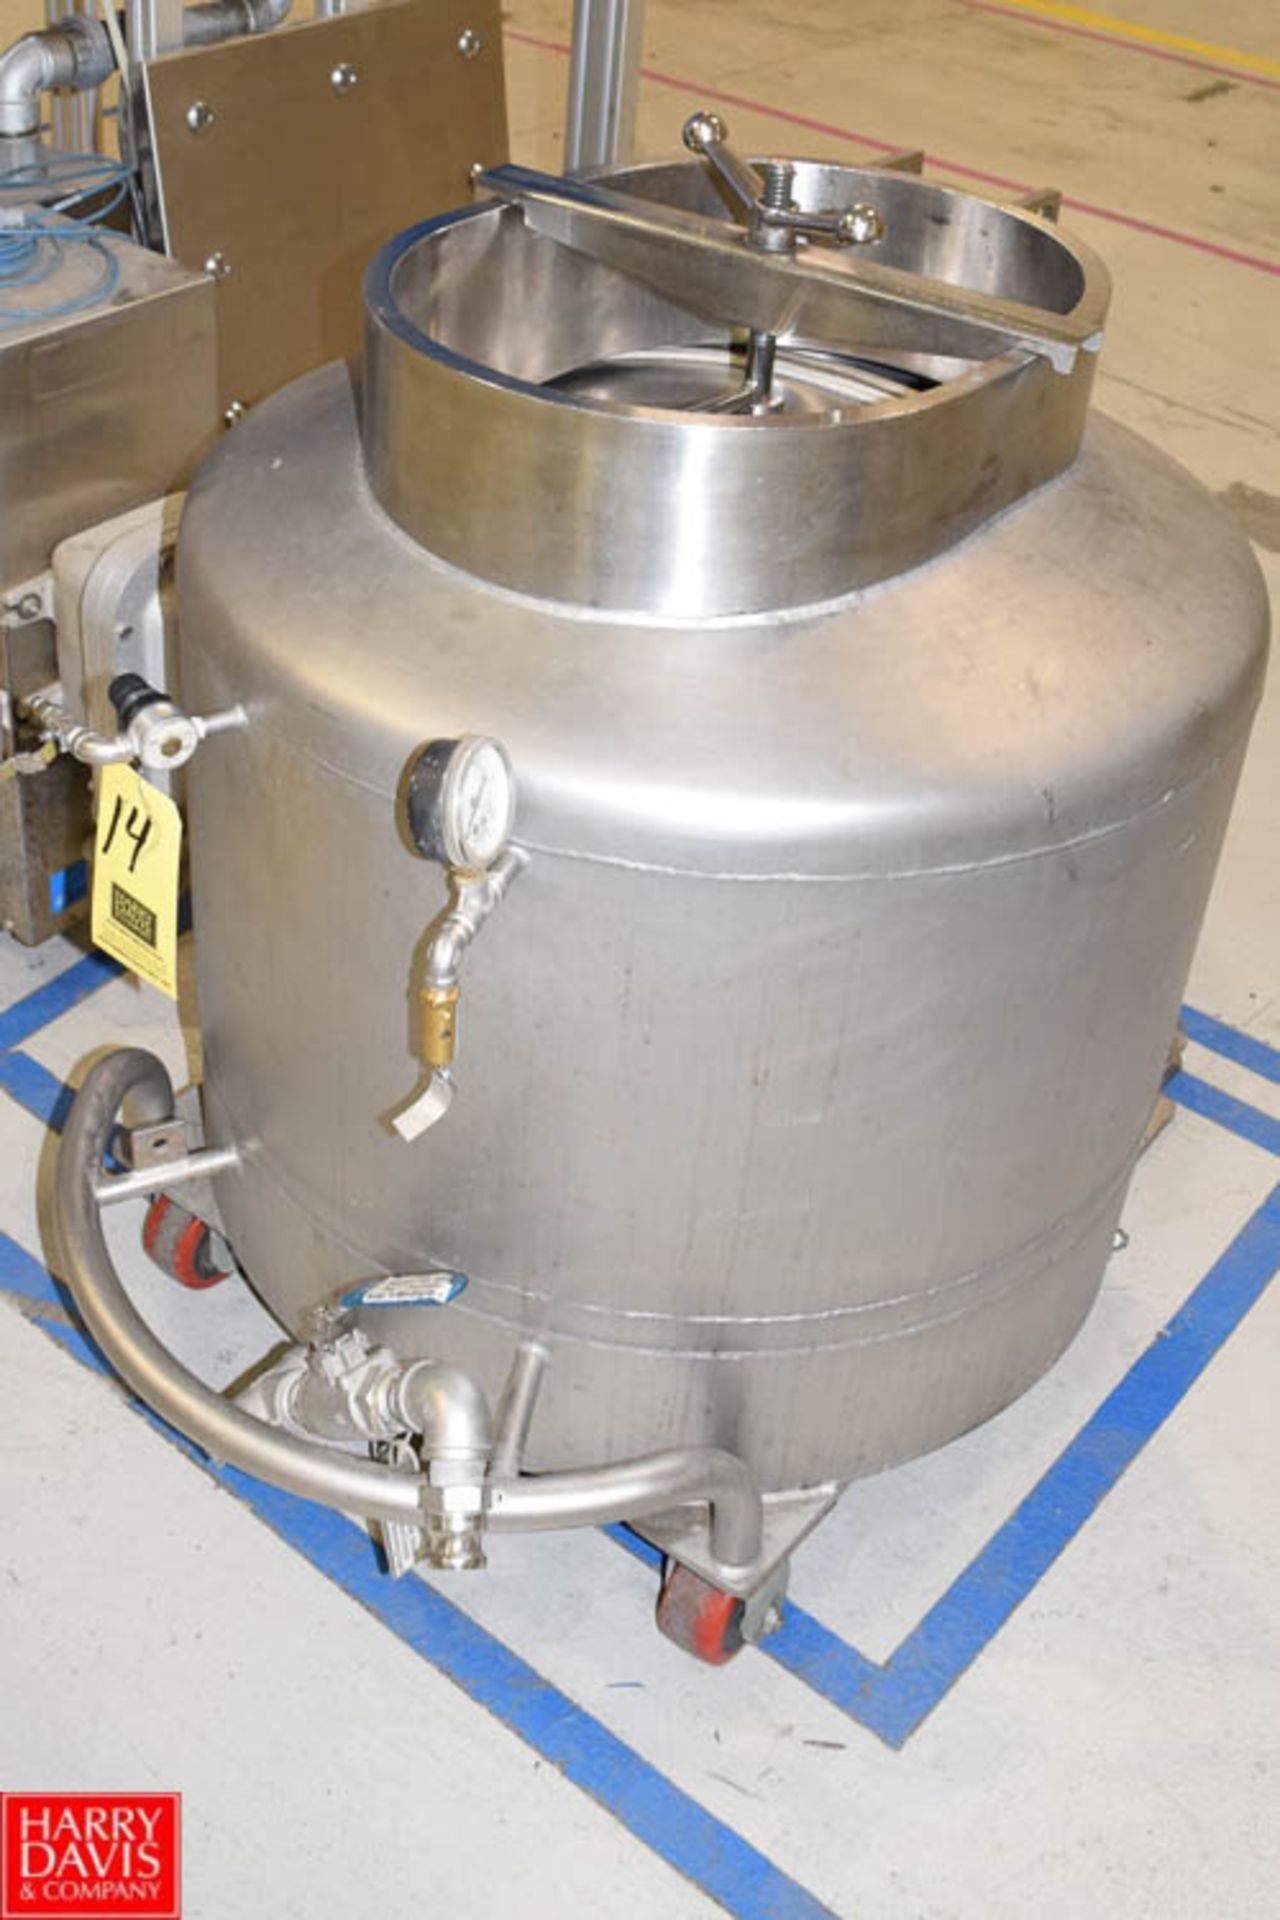 All Weld Jacketed S/S Portable Tank, 25 PSI - Rigging Fee $ 65